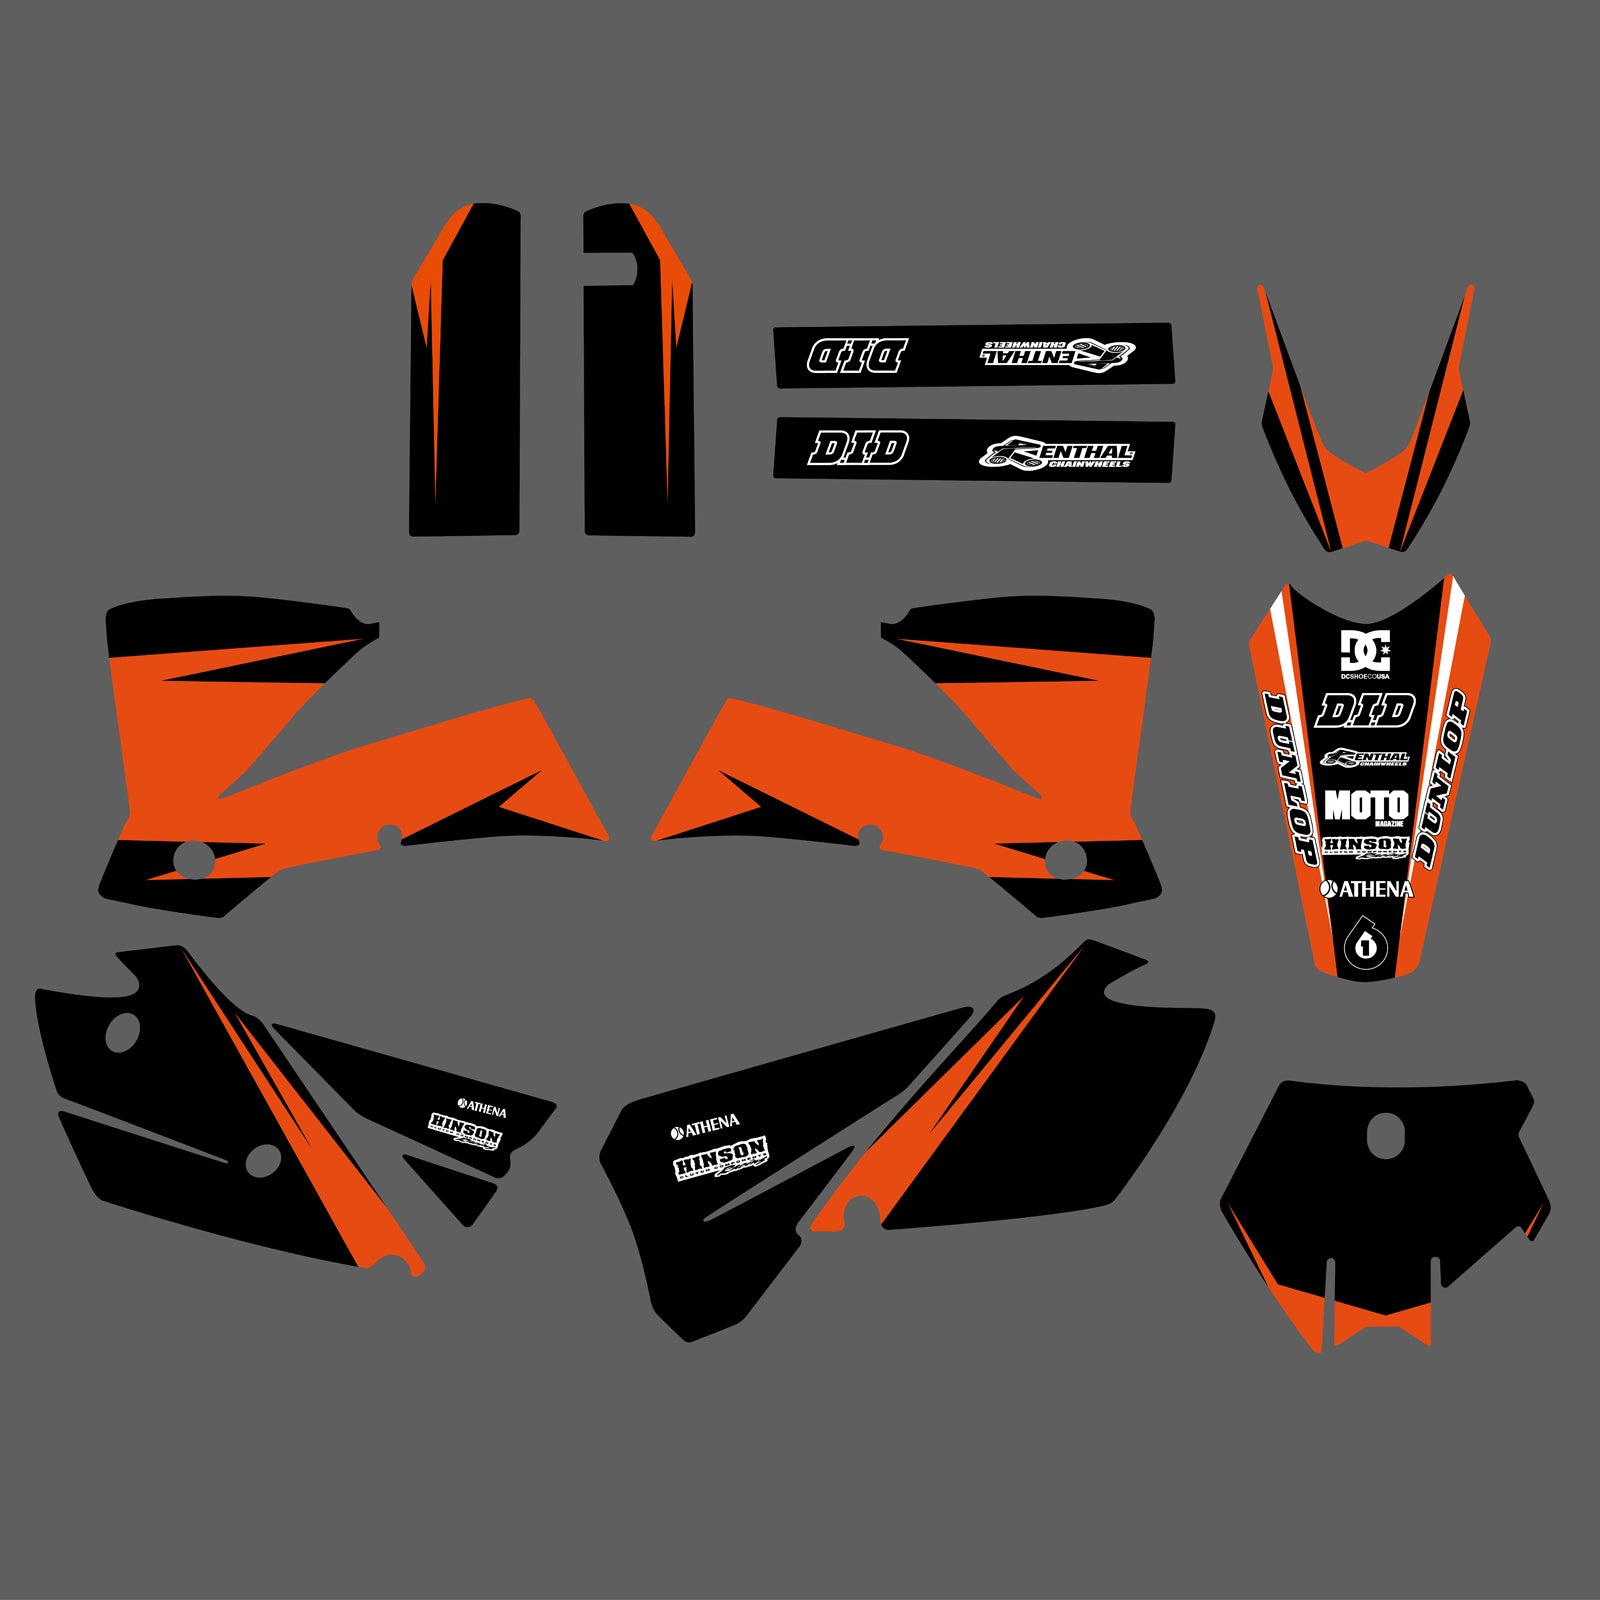 Motorcycle Team Graphics Backgrounds Decals Stickers For KTM SX 2003-2004